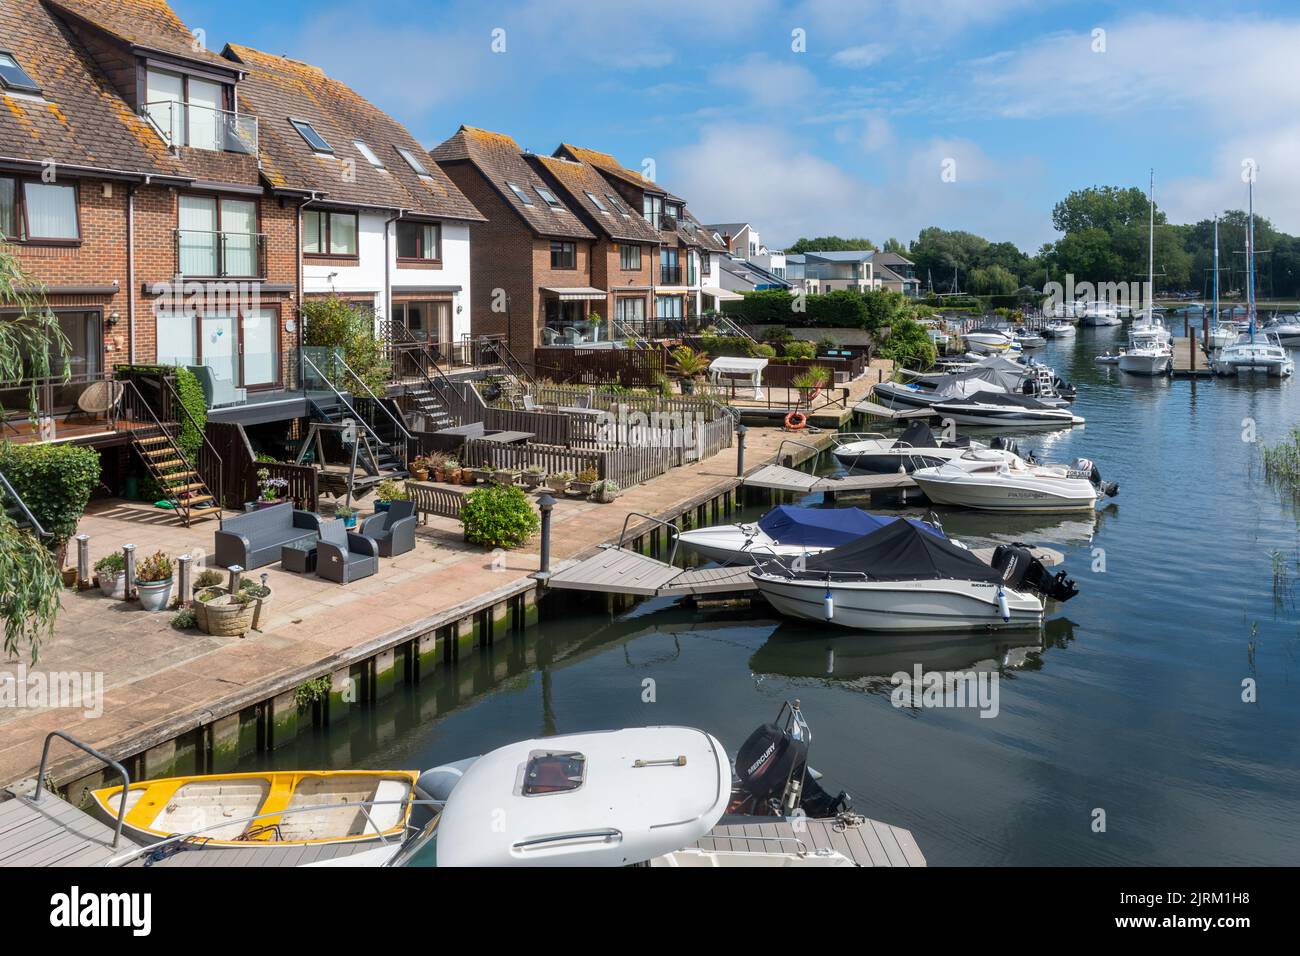 Boats on the River Stour in Christchurch, Dorset, England, UK, and exclusive properties, on a sunny summer day Stock Photo